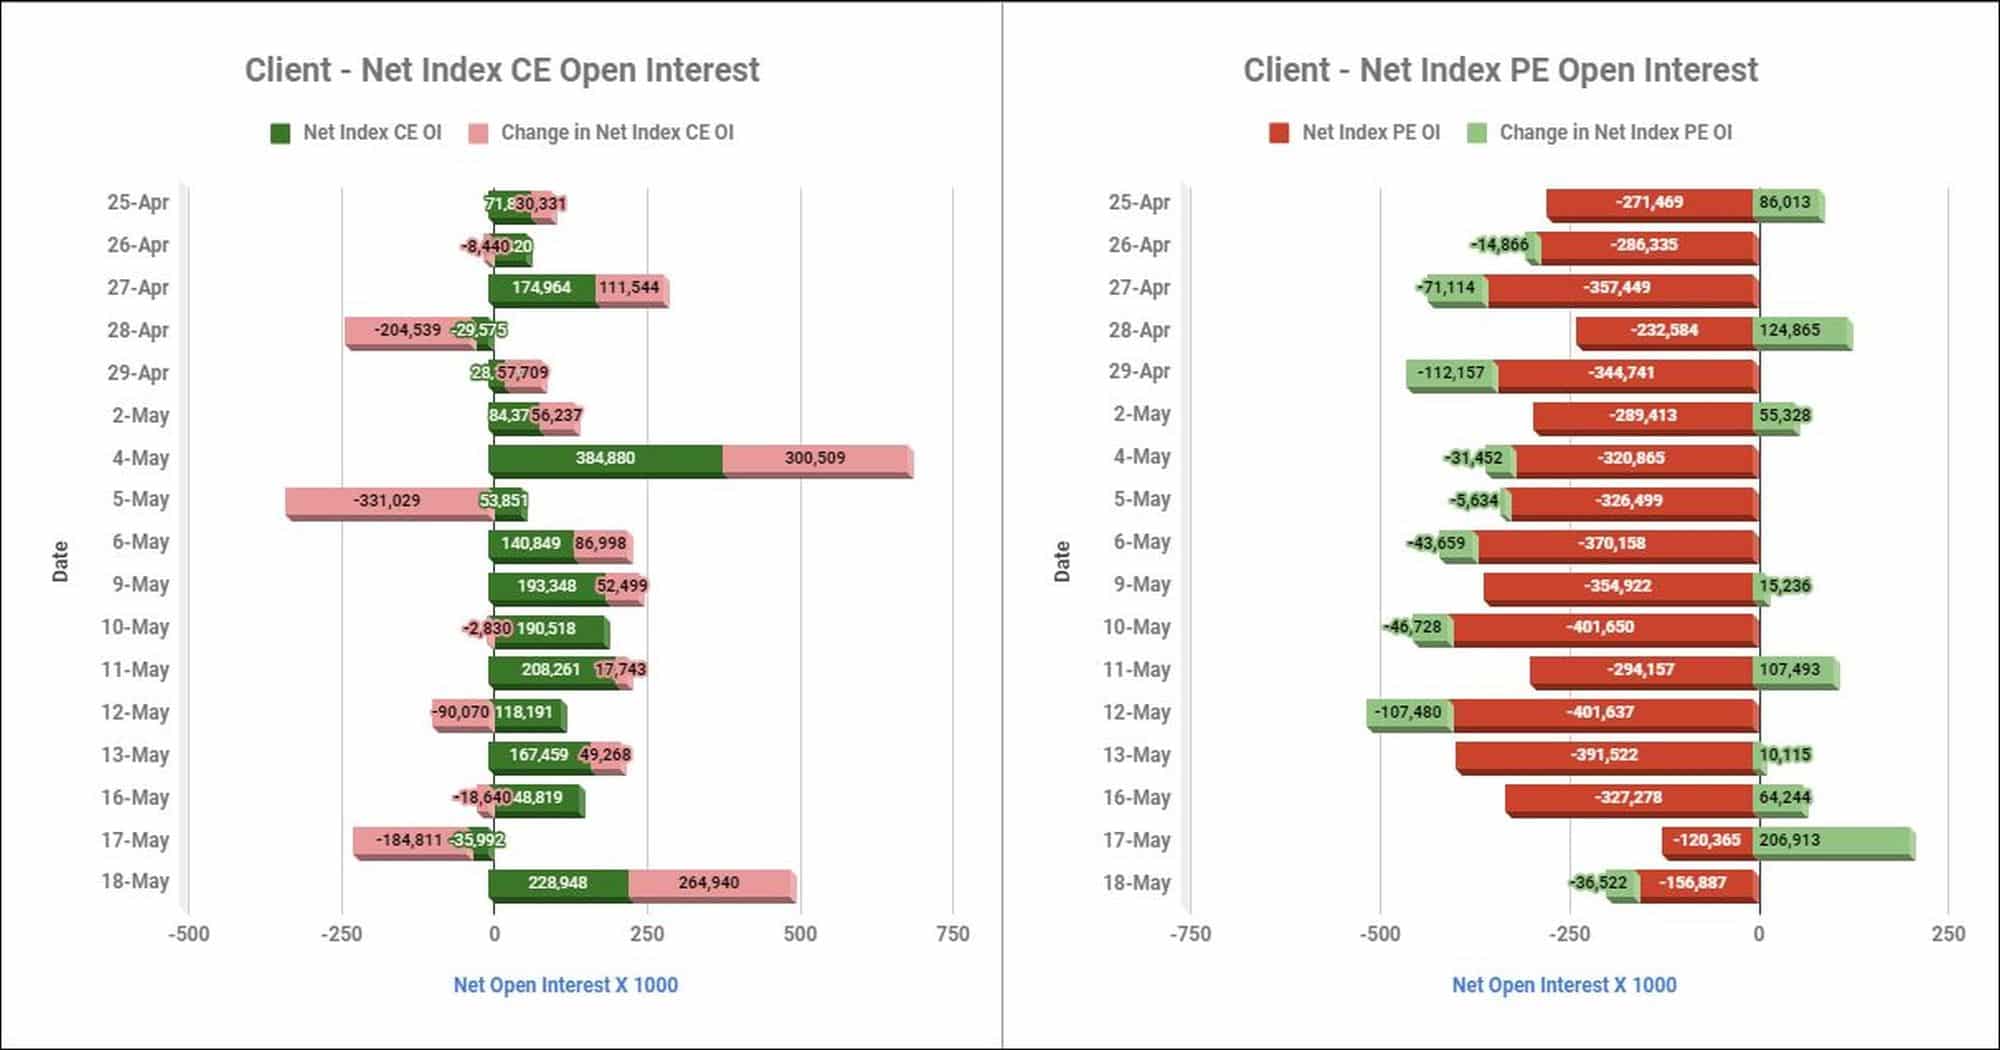 Clientinop18May Participantwise Net Open Interest And Net Equity Investments – 18Th May 2022 Client, Equity, Fii, Index Futures, Index Options, Open Interest, Prop